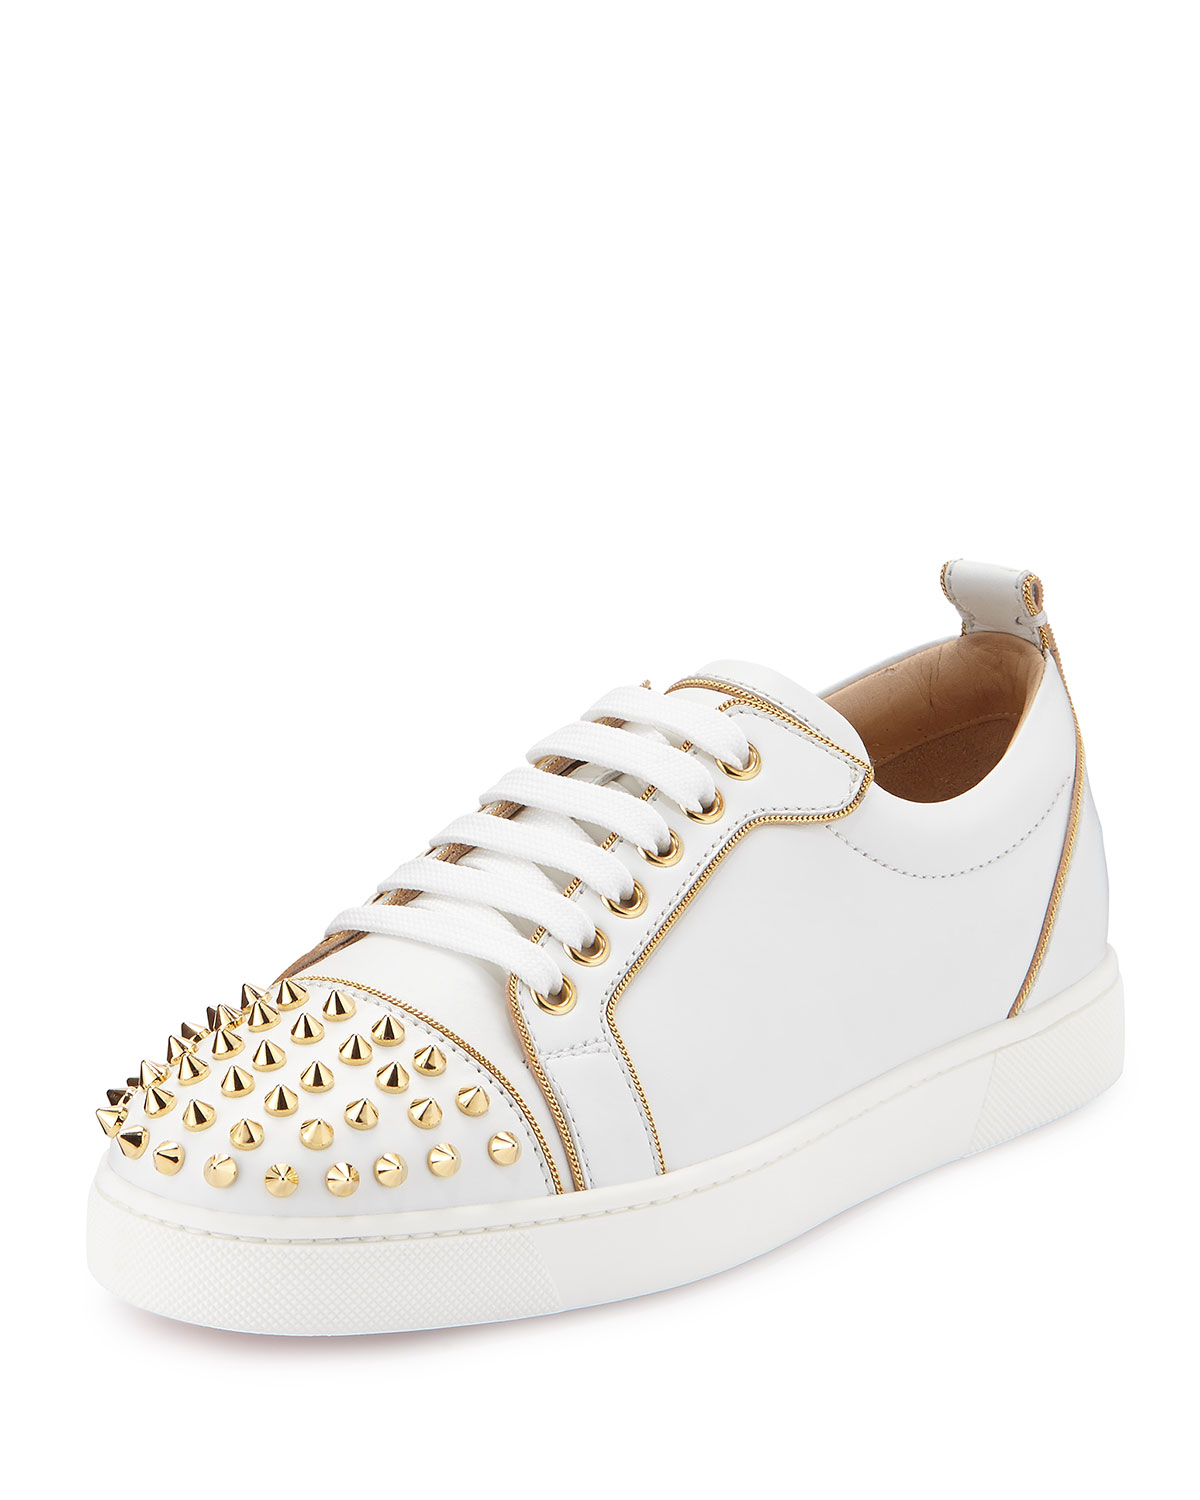 Lyst - Christian Louboutin Rush Spiked Leather Low-Top Sneaker in White